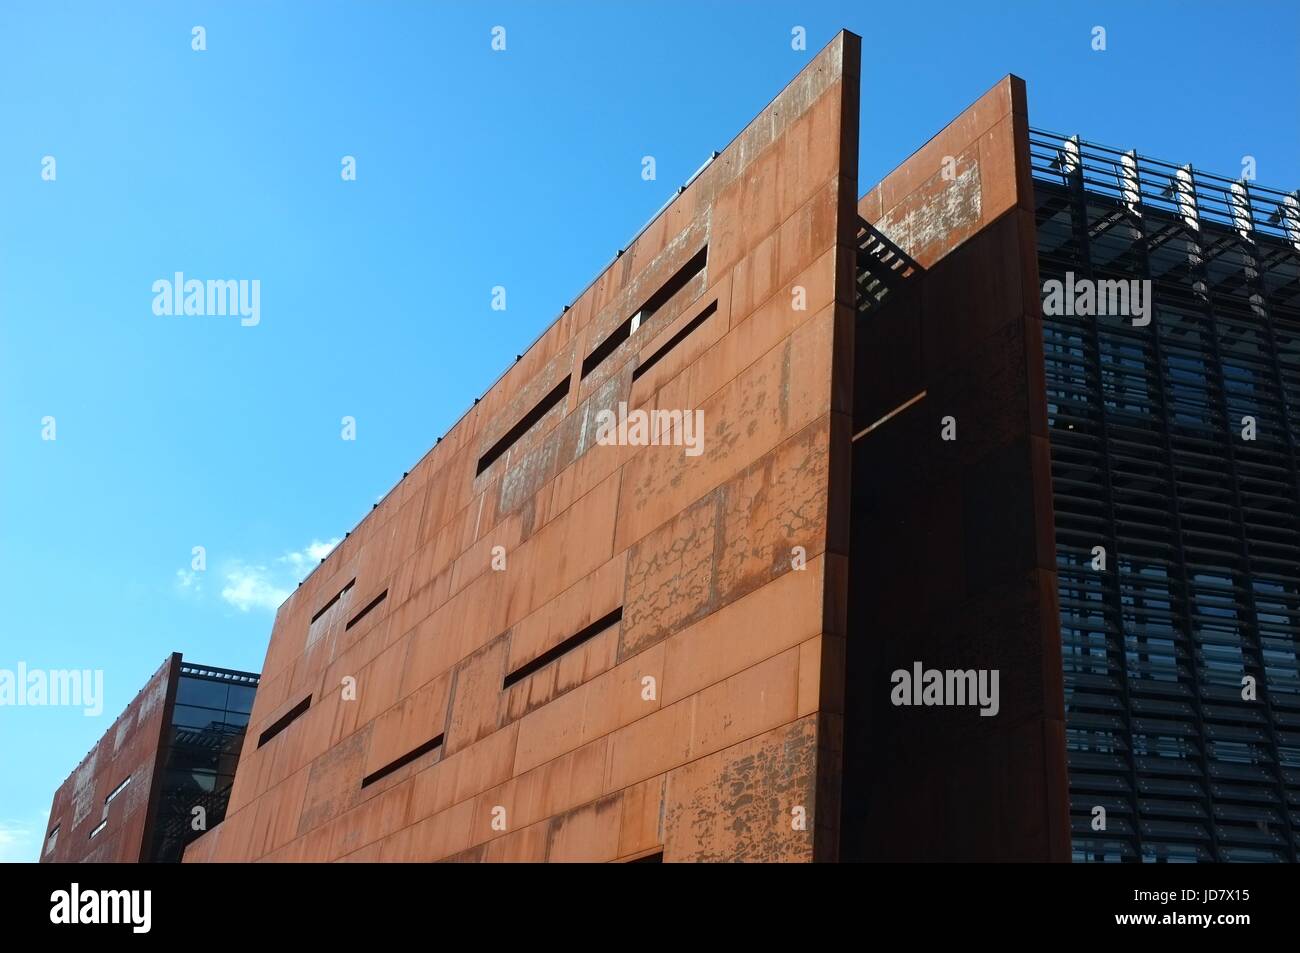 European Solidarity Museum in Gdansk, Poland, central/eastern Europe. June 2017. Stock Photo